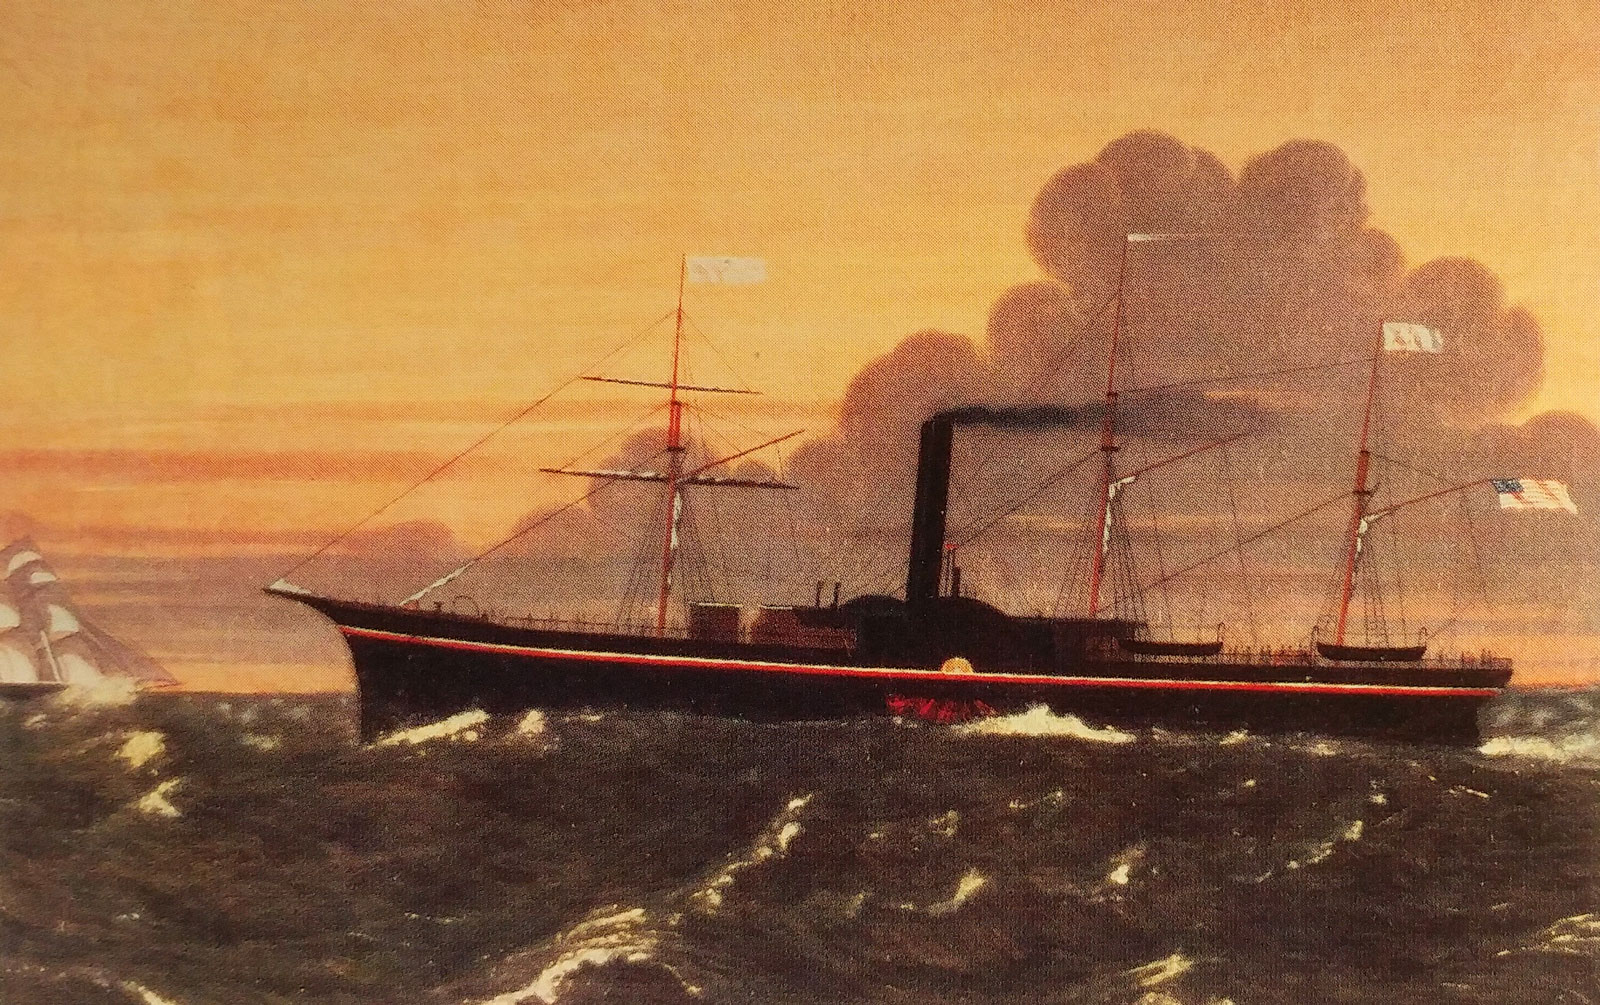 The Central America was a 280-foot sidewheel steamship ferrying people from New York to Panama and back, usually adventurers and families heading to California. Returning miners often had secret stashes of gold nuggets in addition to the large amounts of gold bullion and minted gold coins belonging to banks.